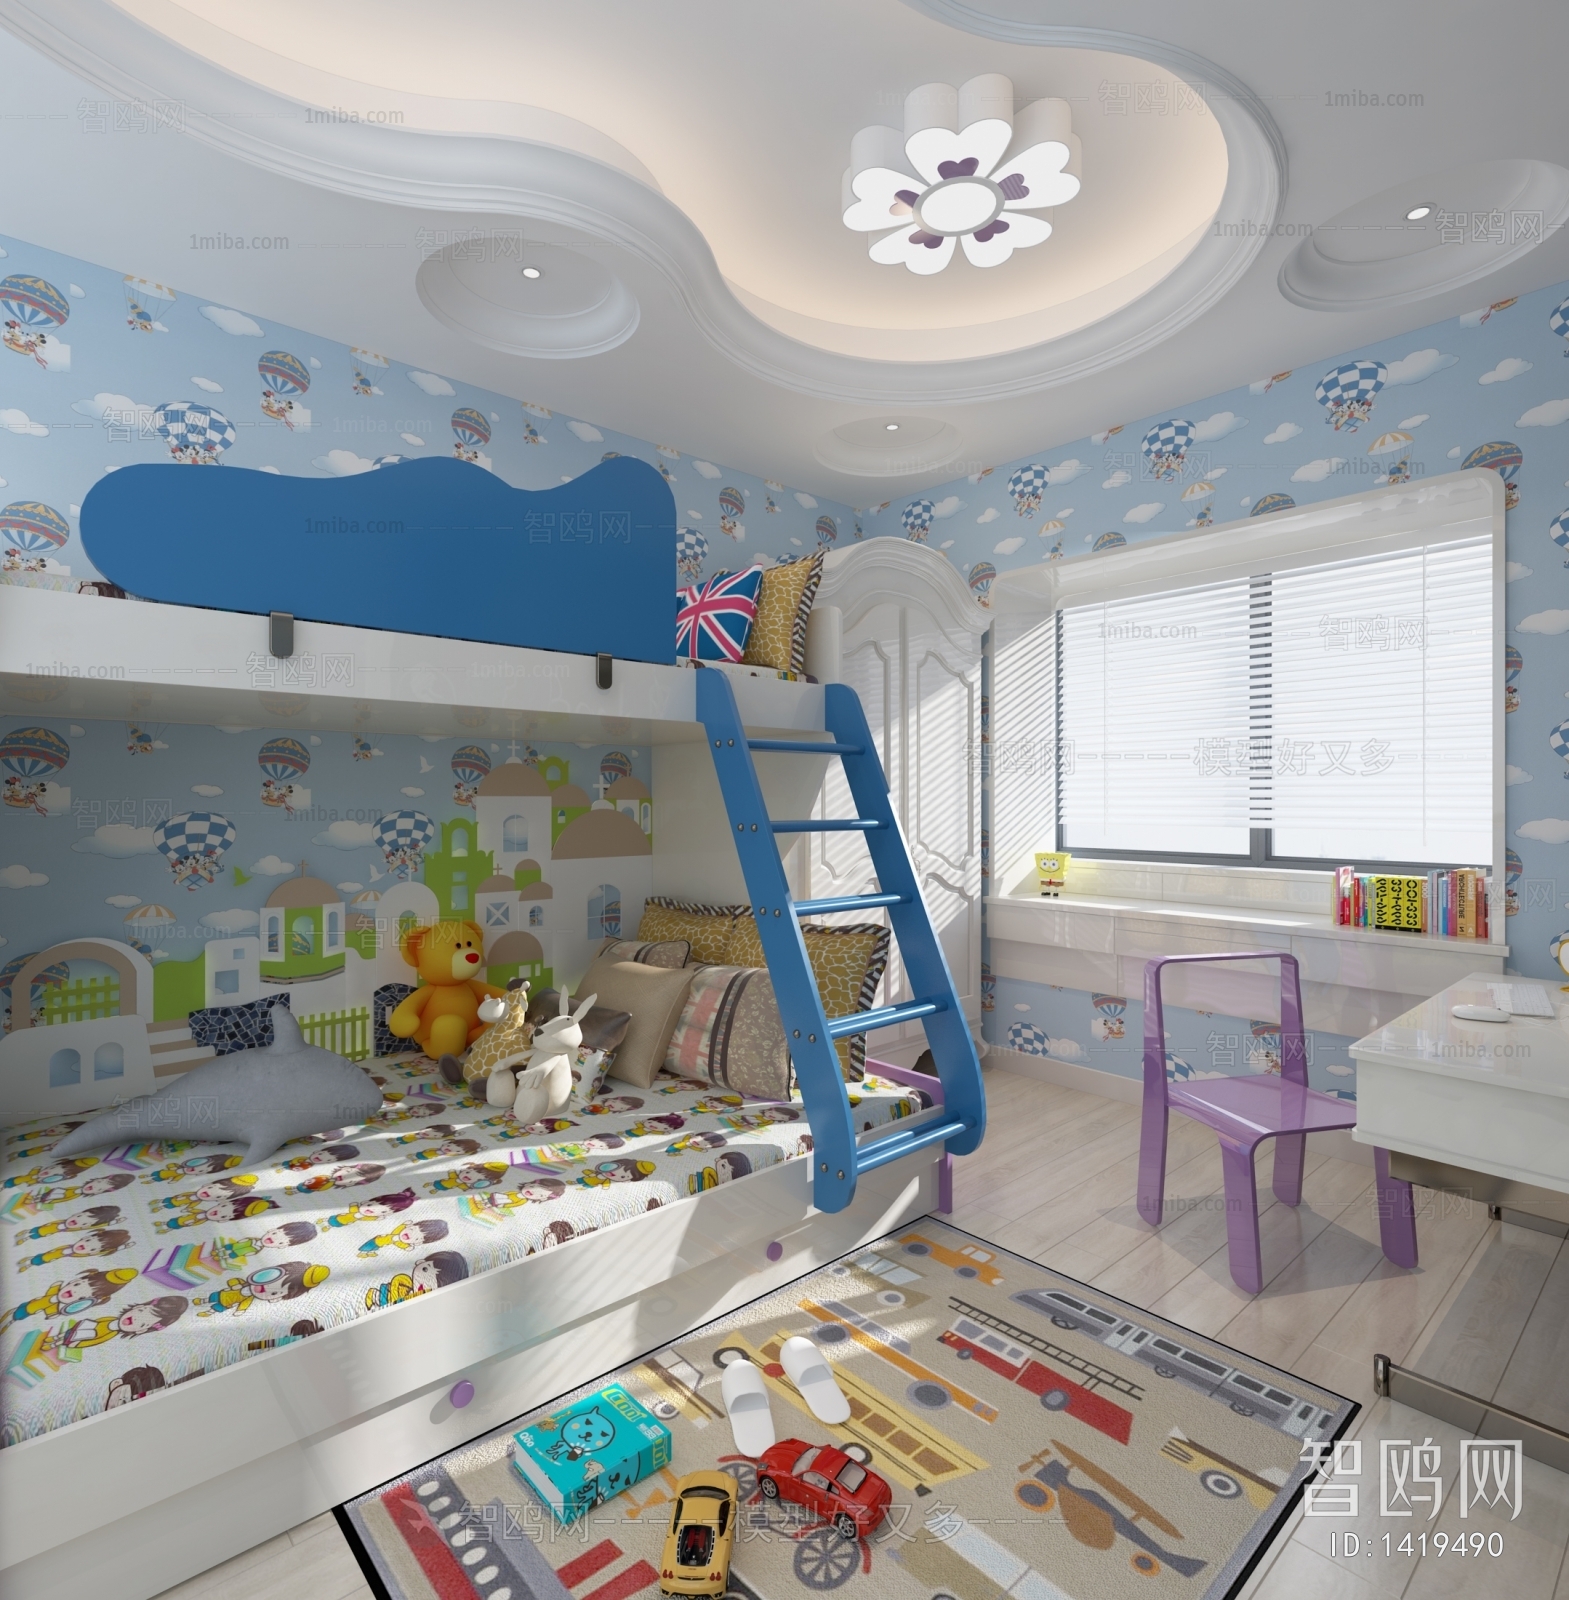 Mix And Match Styles Children's Room